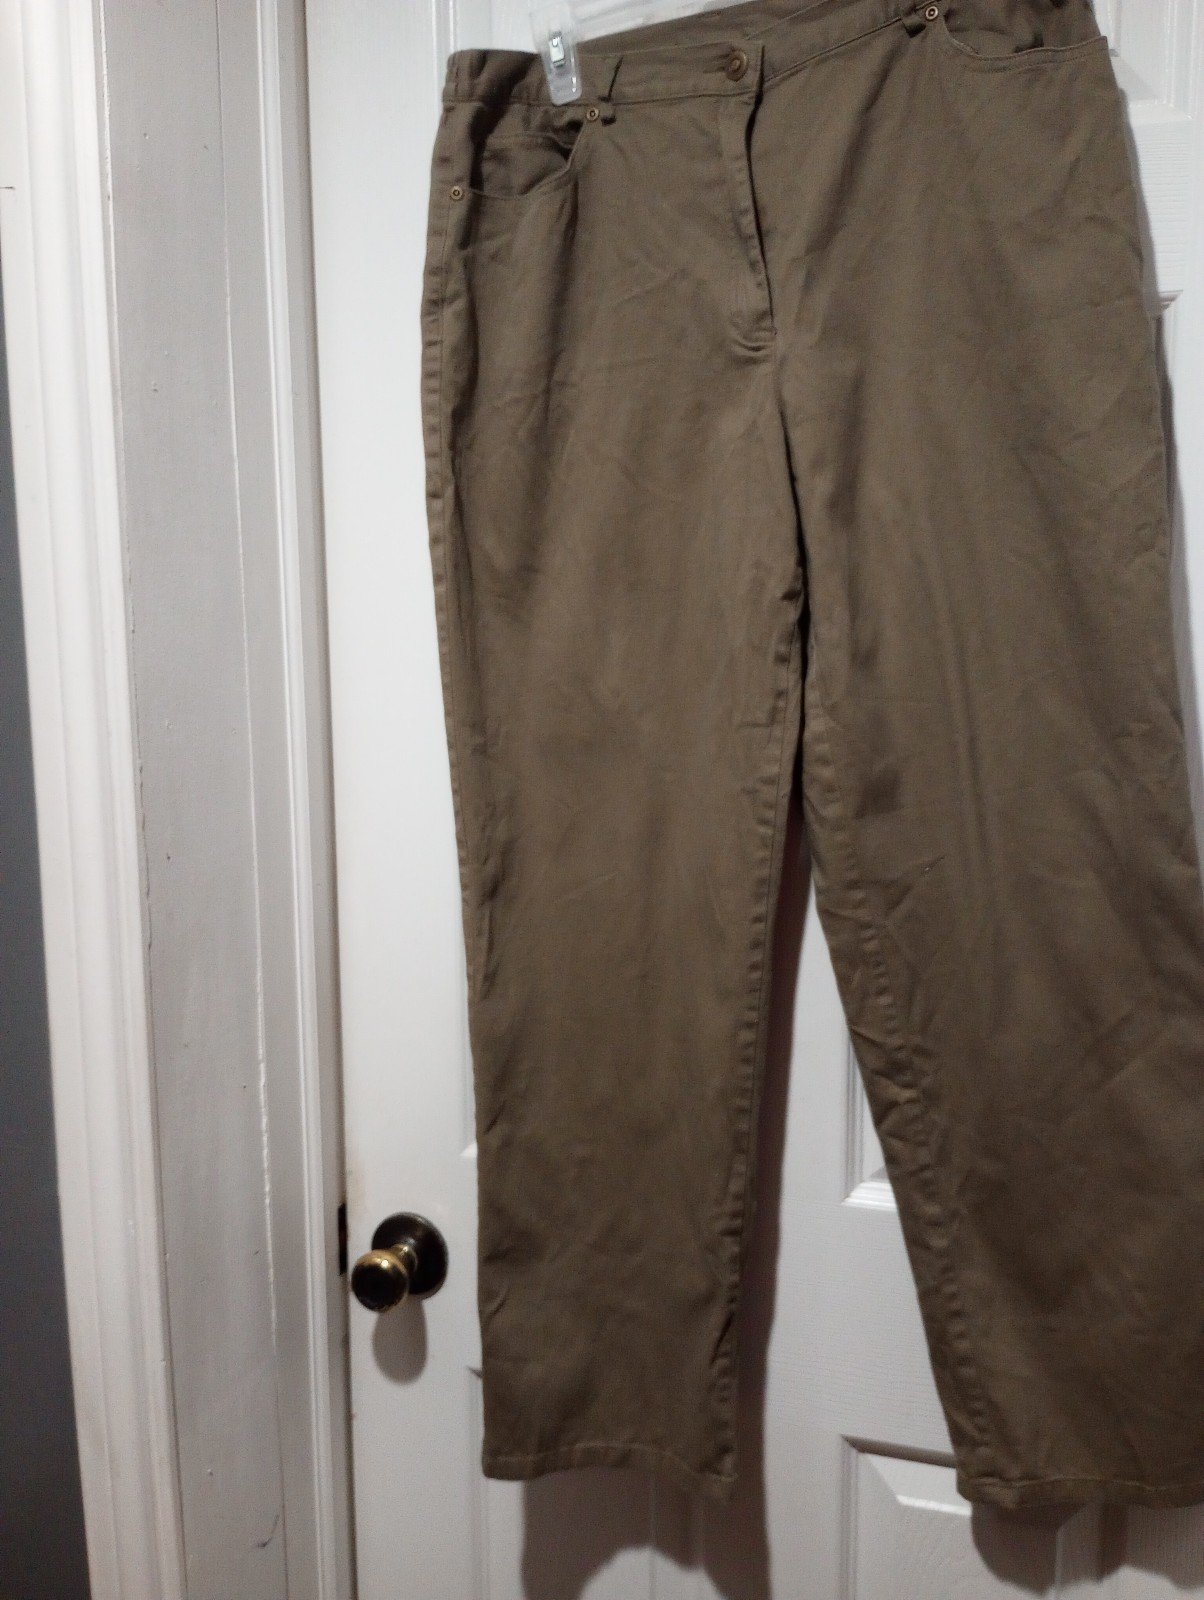 Perfect New Women´s Ruby Rd. Pants size 14 Olive g